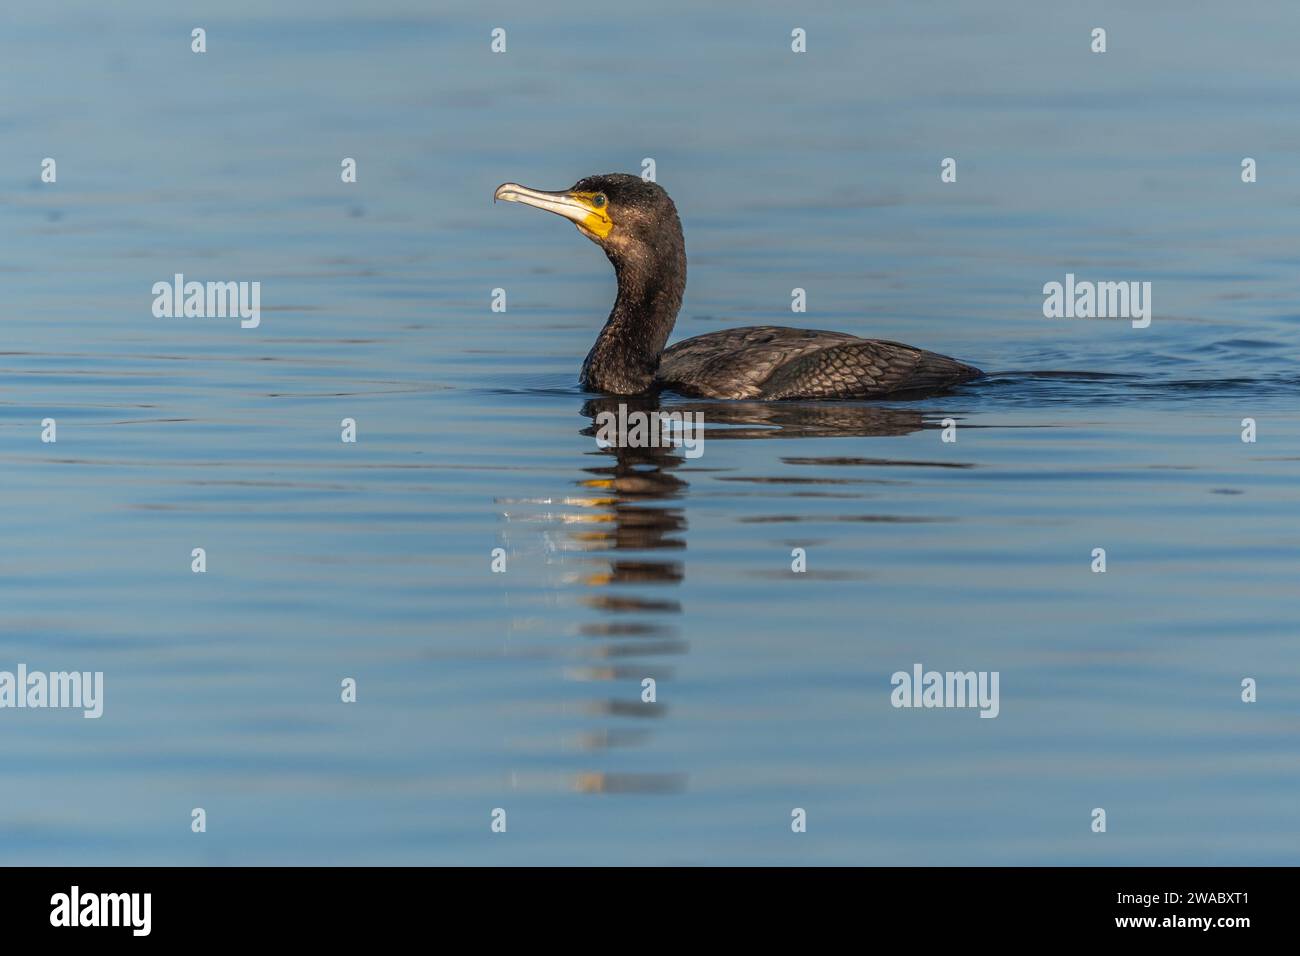 Great cormorant (Phalacrocorax carbo) swimming in the water in search of food. Bas-Rhin, Alsace,Grand Est, France, Europe. Stock Photo